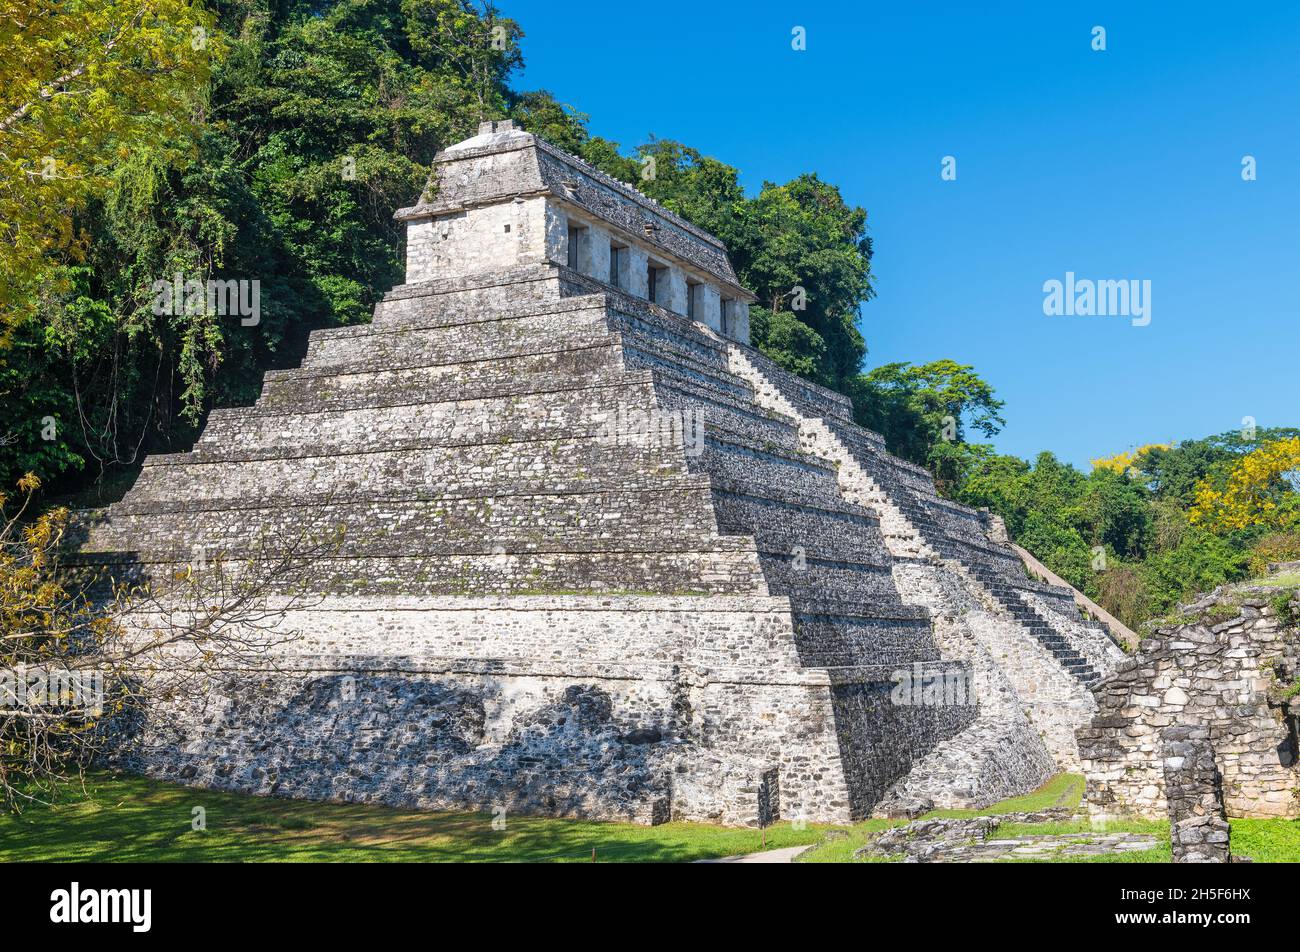 Mayan Temple of Inscriptions pyramid and tomb of King Pakal, Palenque, Chiapas, Mexico. Stock Photo